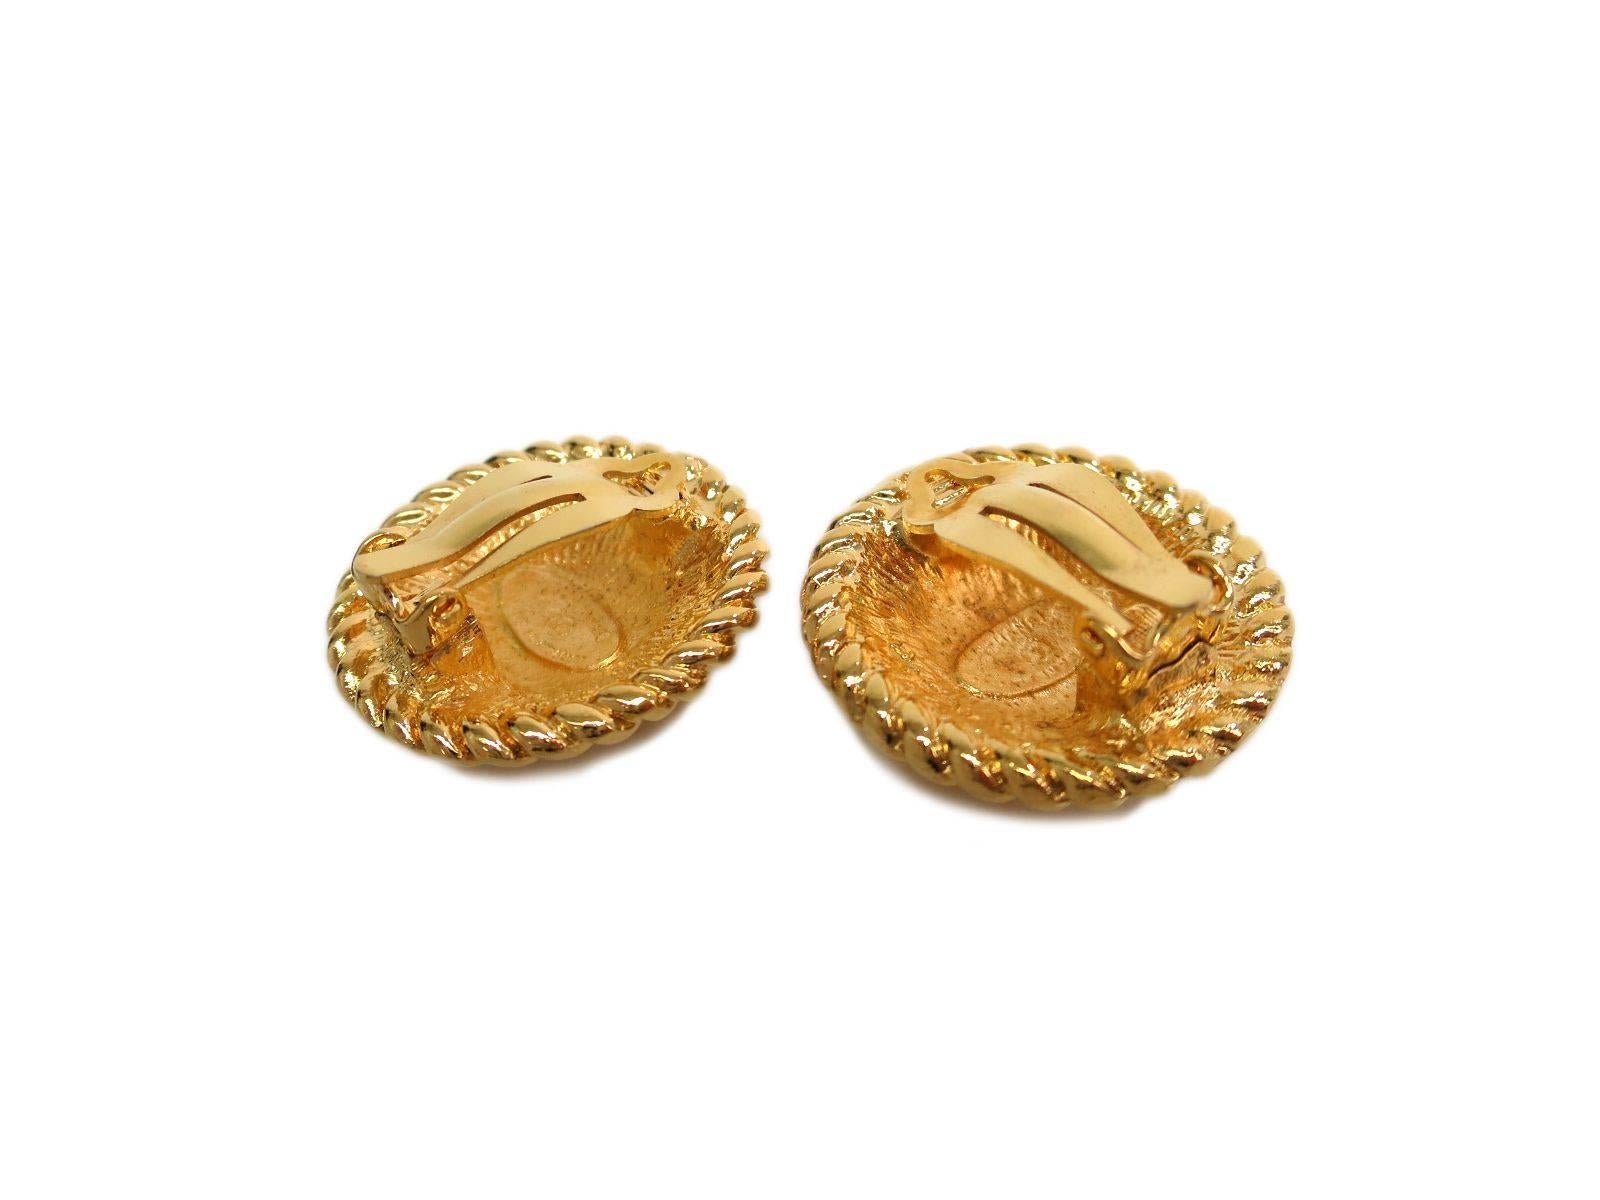 Are you royalty because you sure look it with these rich Chanel gold button earrings dangling from your pretty little ears.  Shiny and bold, they're a must-have for your Coco collection.

Metal
Gold plated
Clip on closure
Made in France
Measures